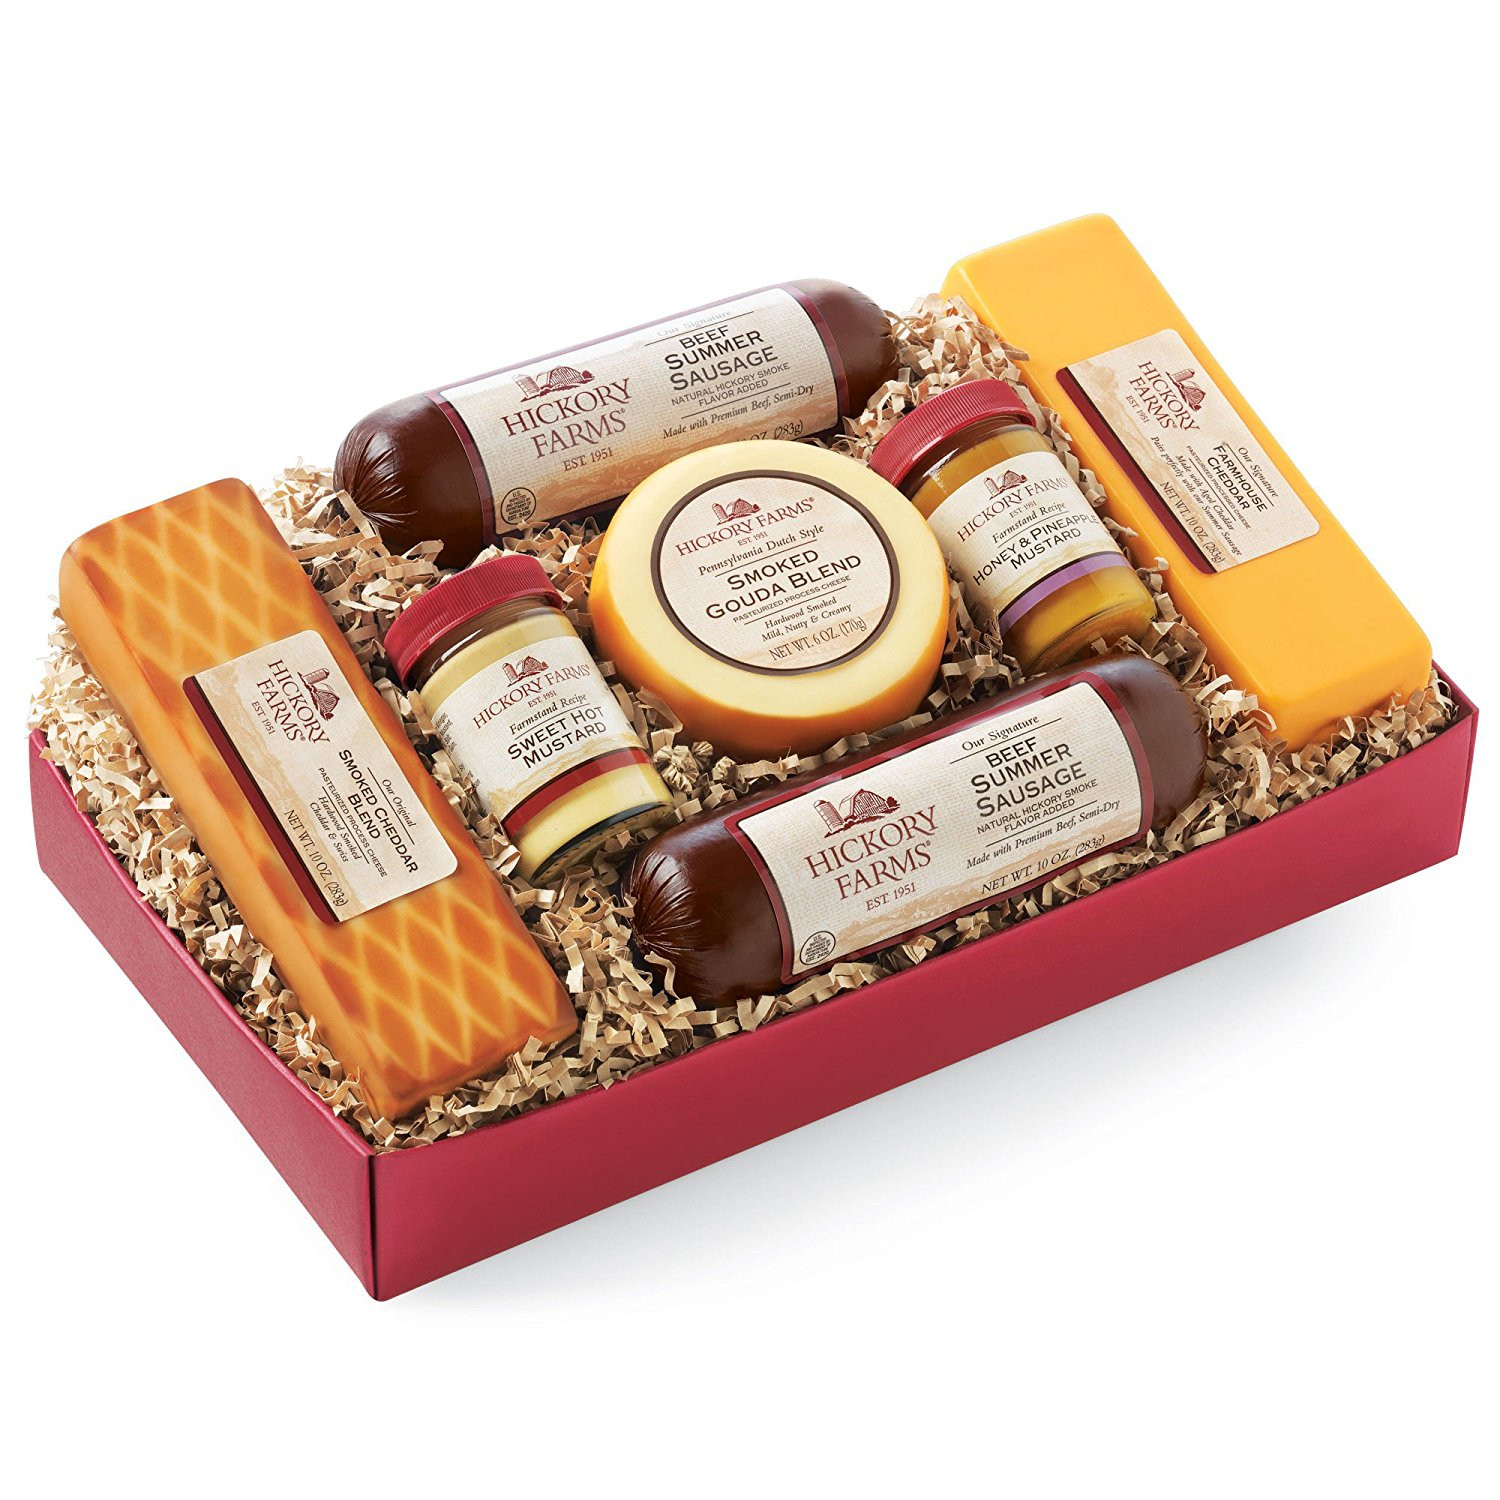 Food Gift Baskets Ideas
 Gourmet Food Gift Baskets Best Cheeses Sausages Meat